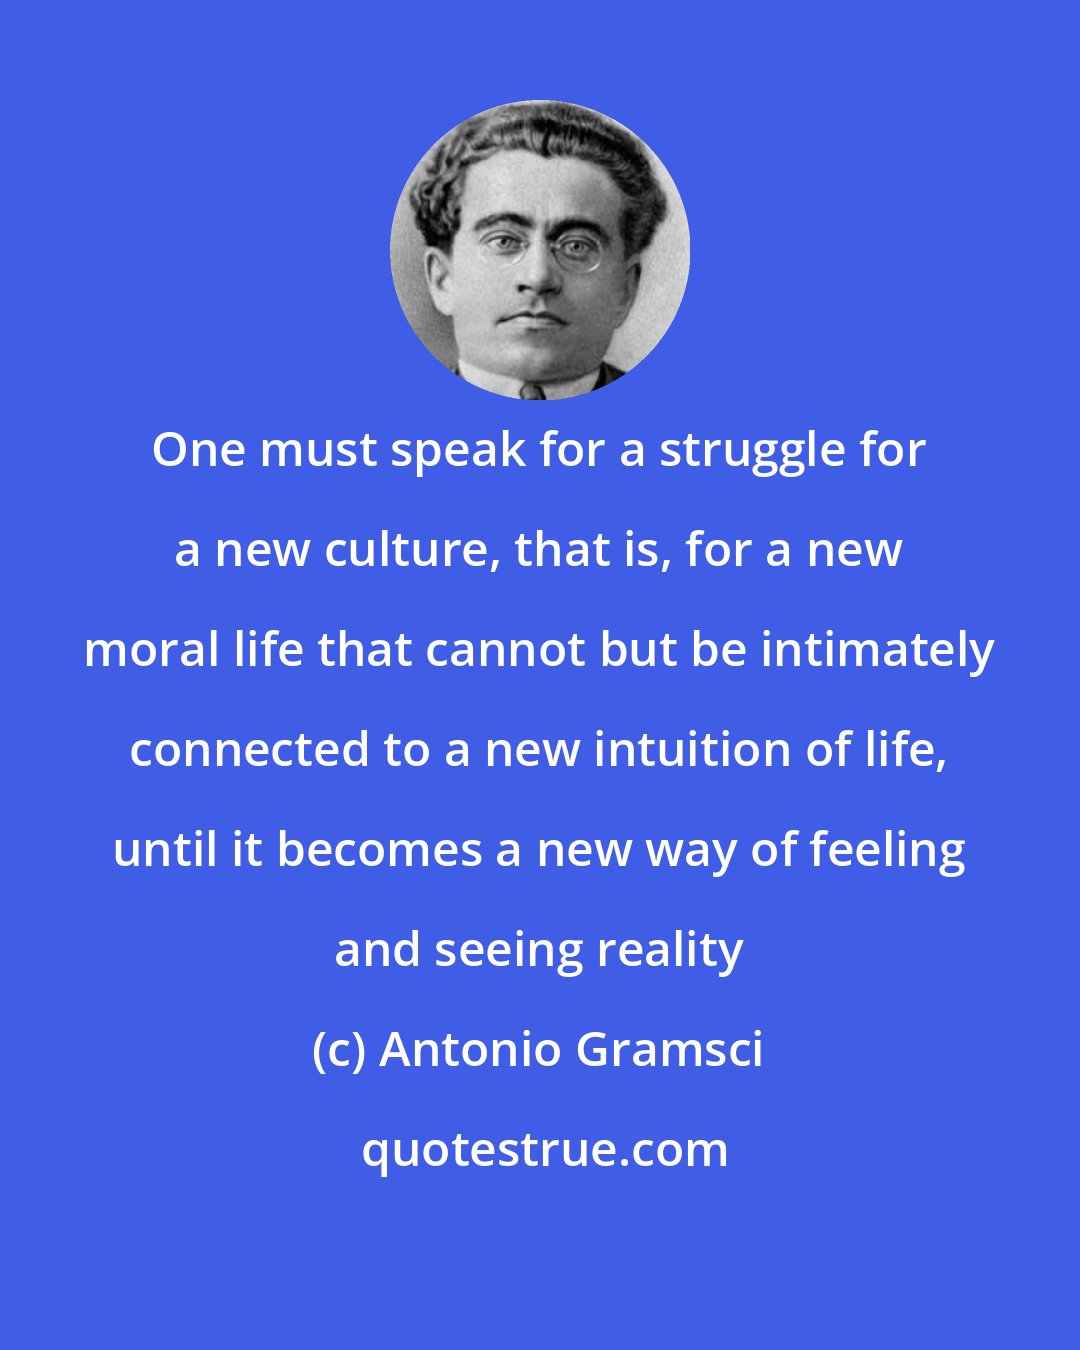 Antonio Gramsci: One must speak for a struggle for a new culture, that is, for a new moral life that cannot but be intimately connected to a new intuition of life, until it becomes a new way of feeling and seeing reality